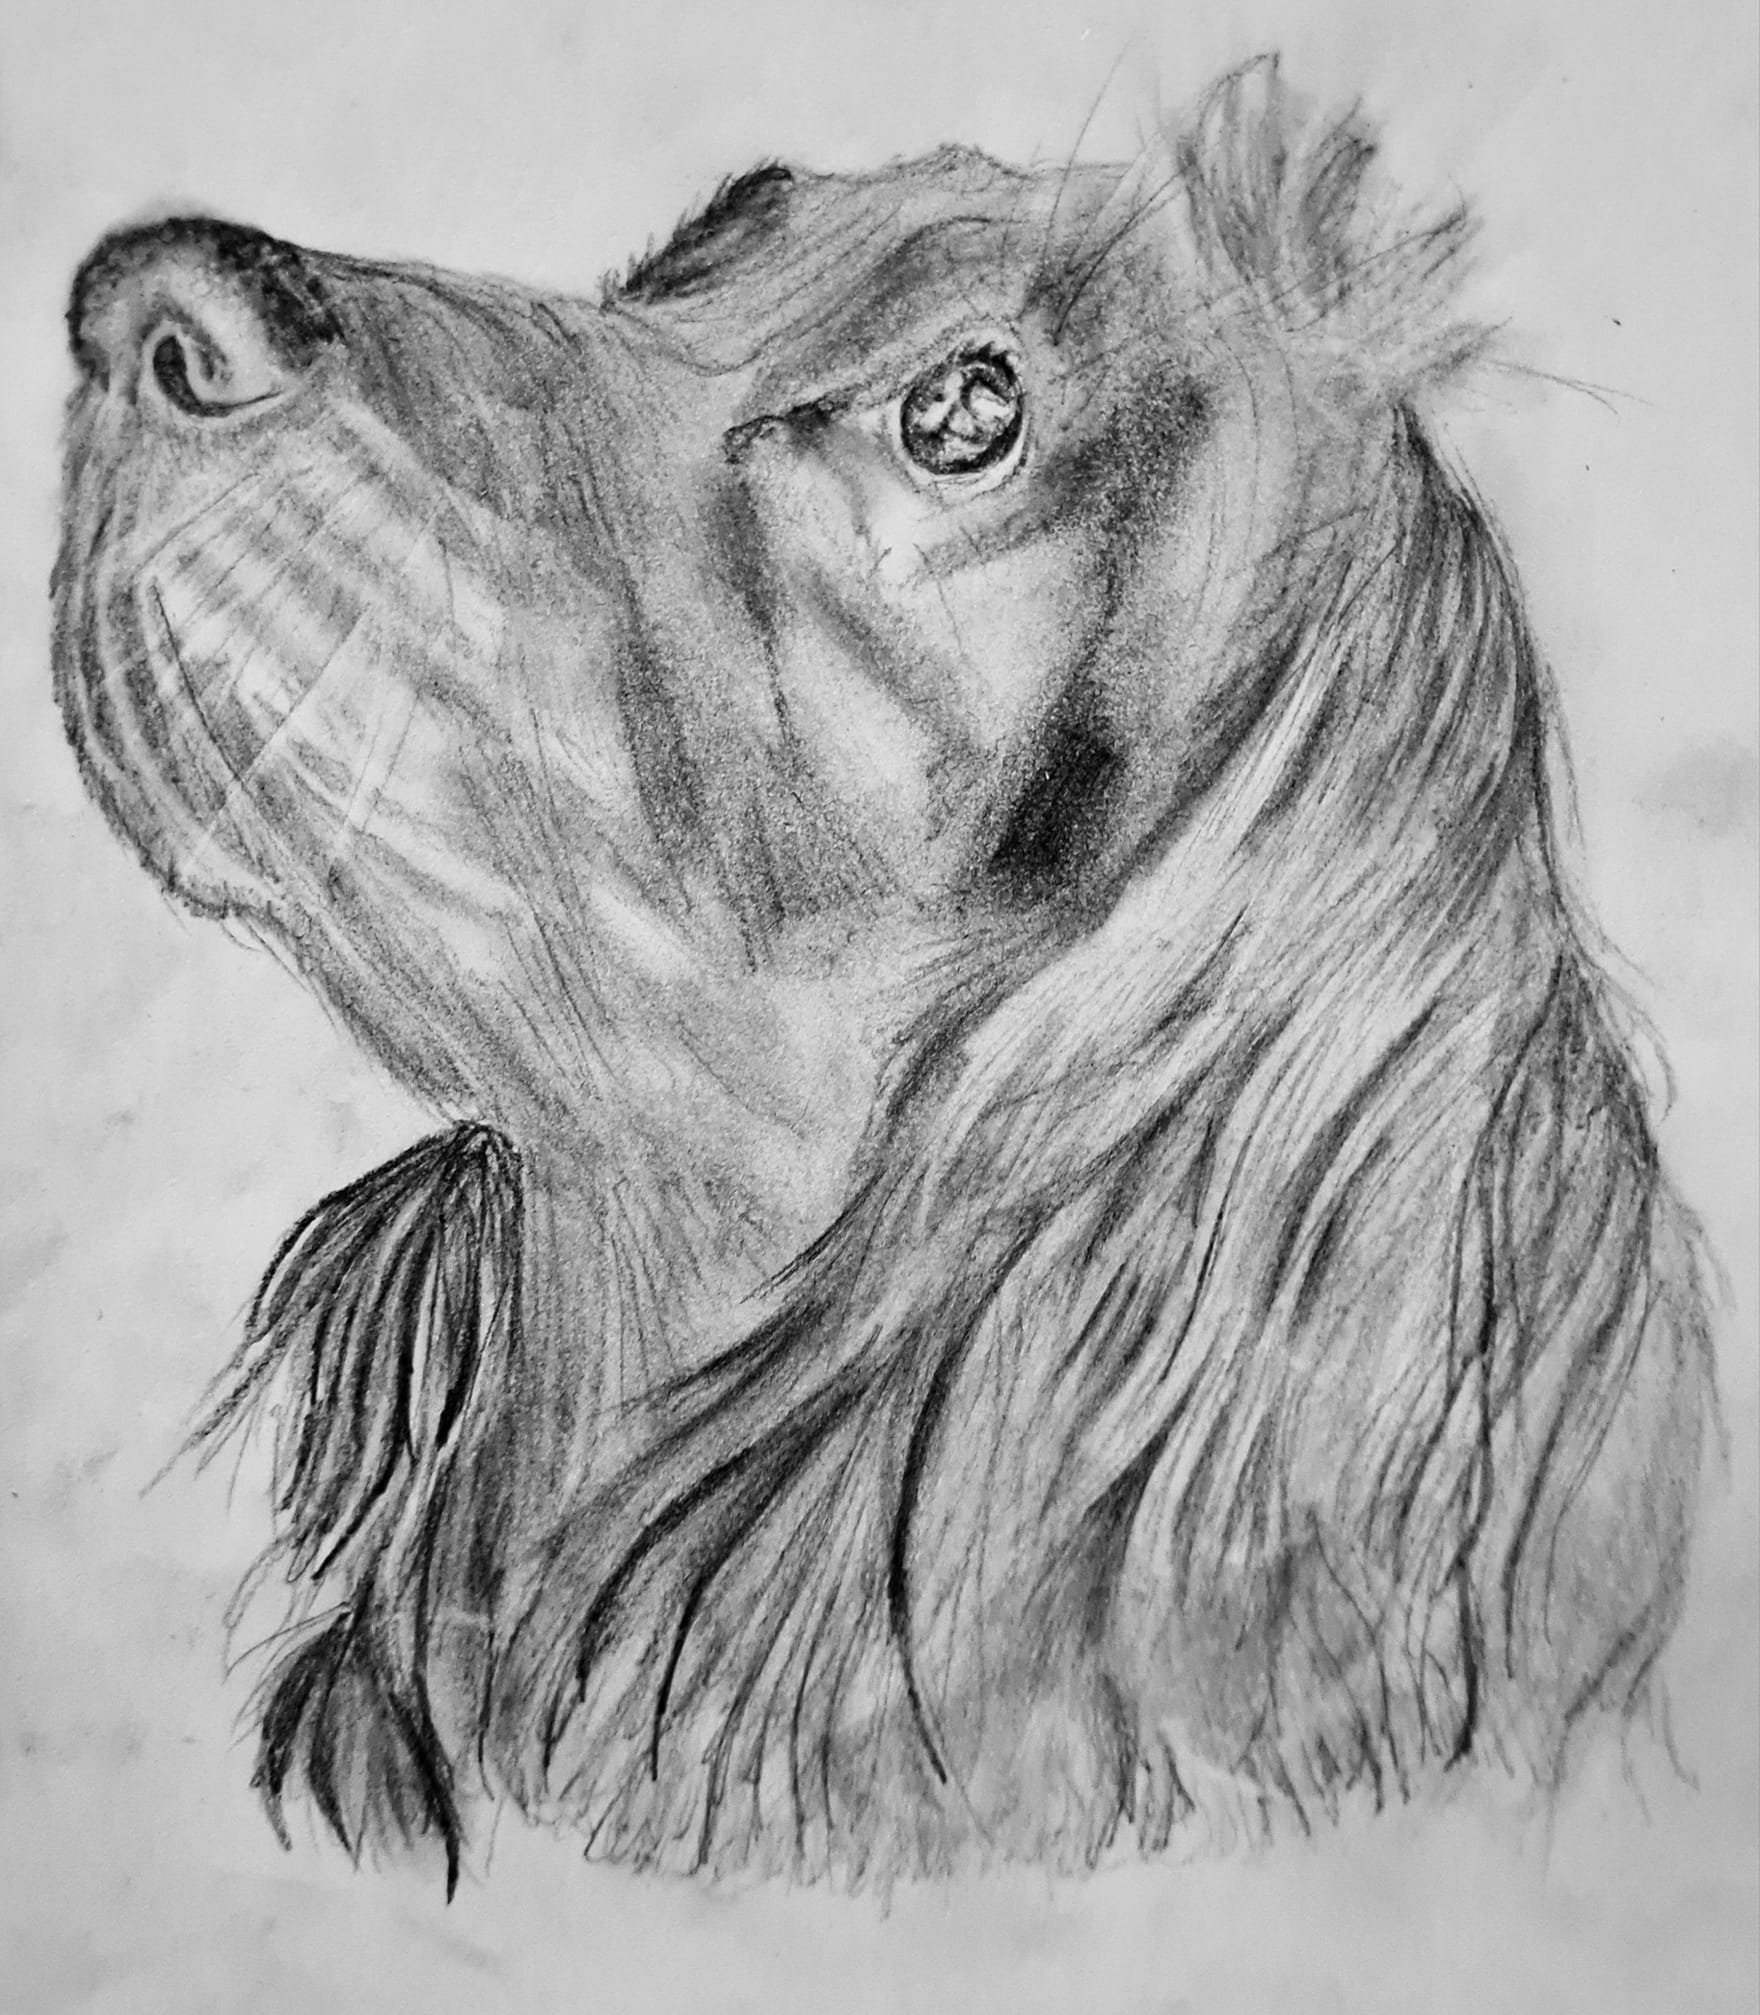 Pencil drawing of a dog looking to the left with head up